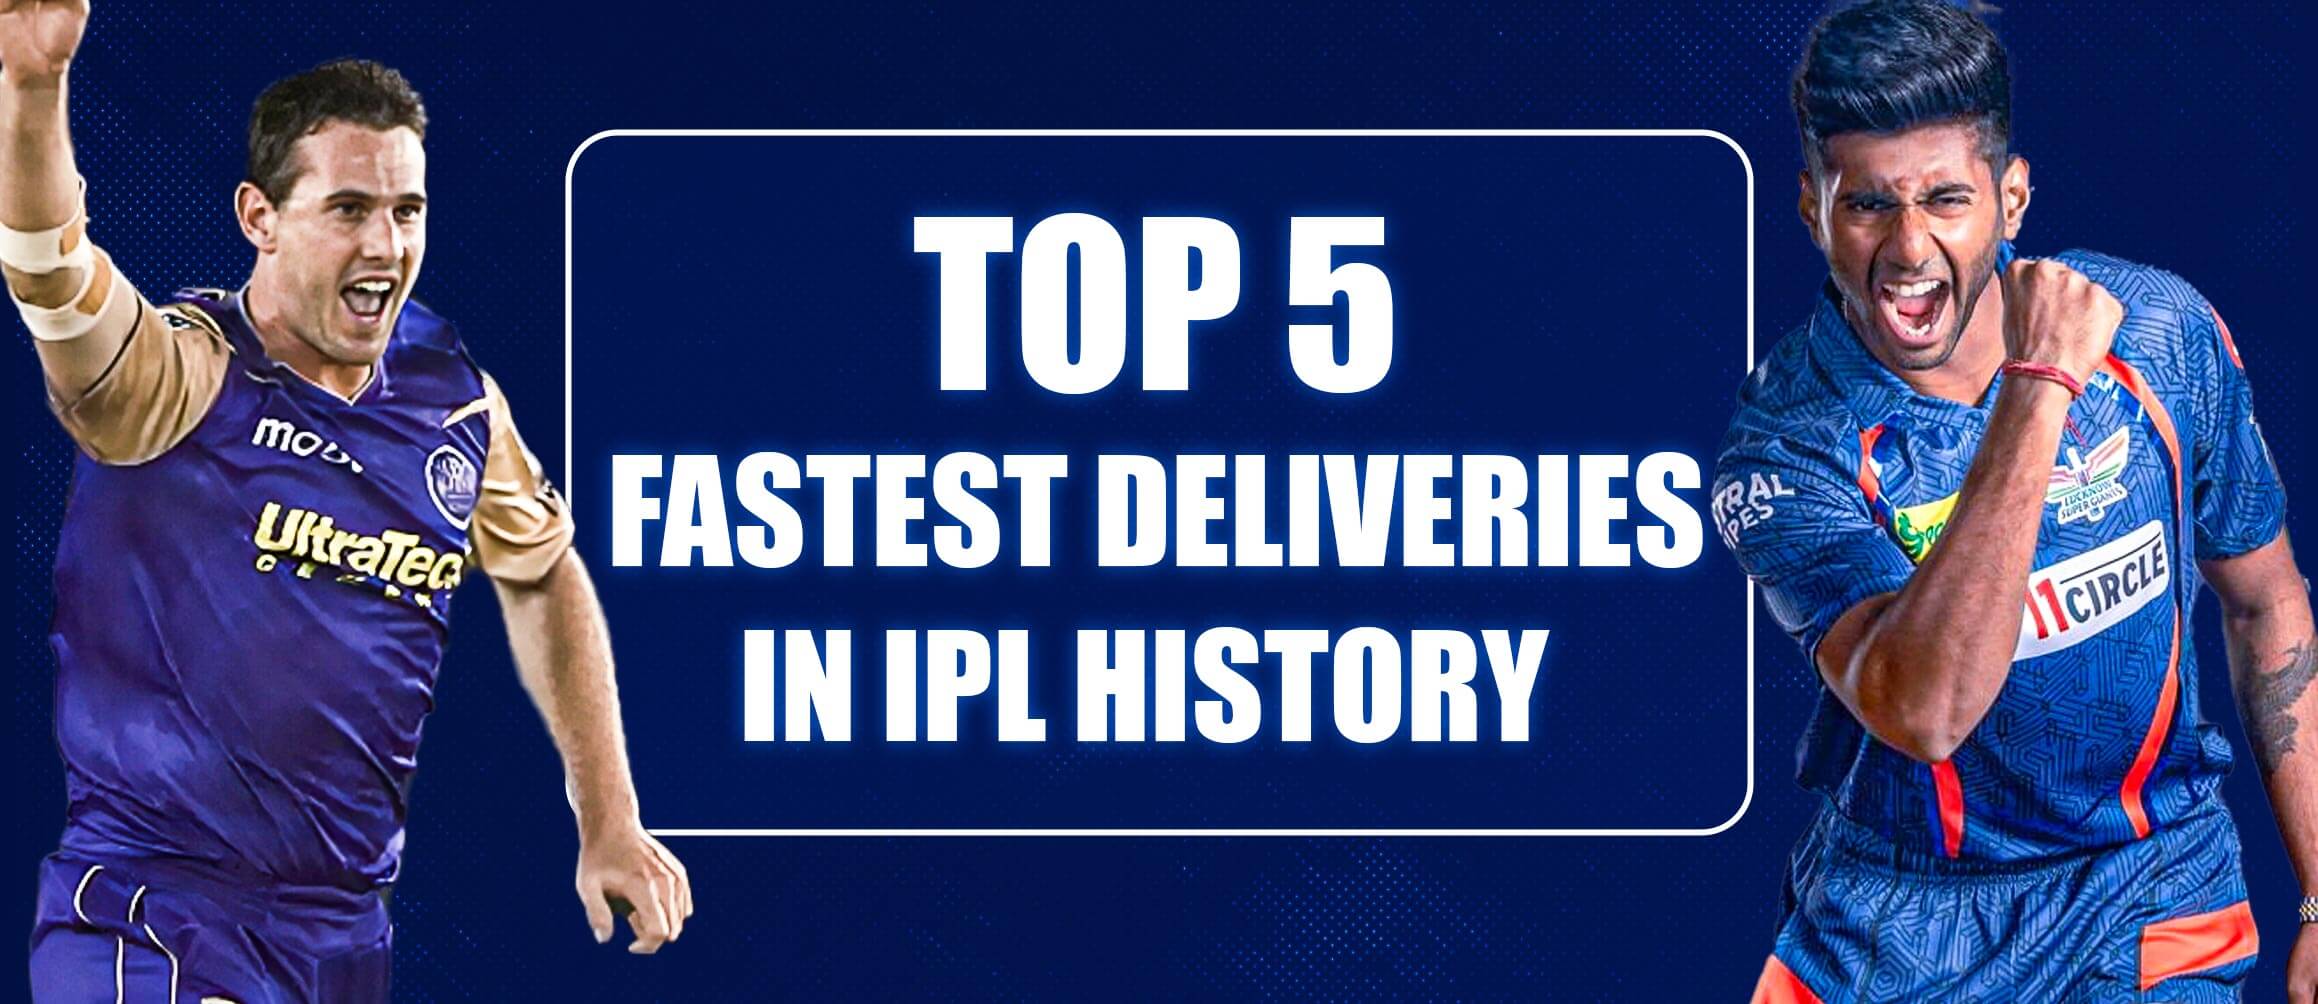 Top 5 Fastest Deliveries in IPL History